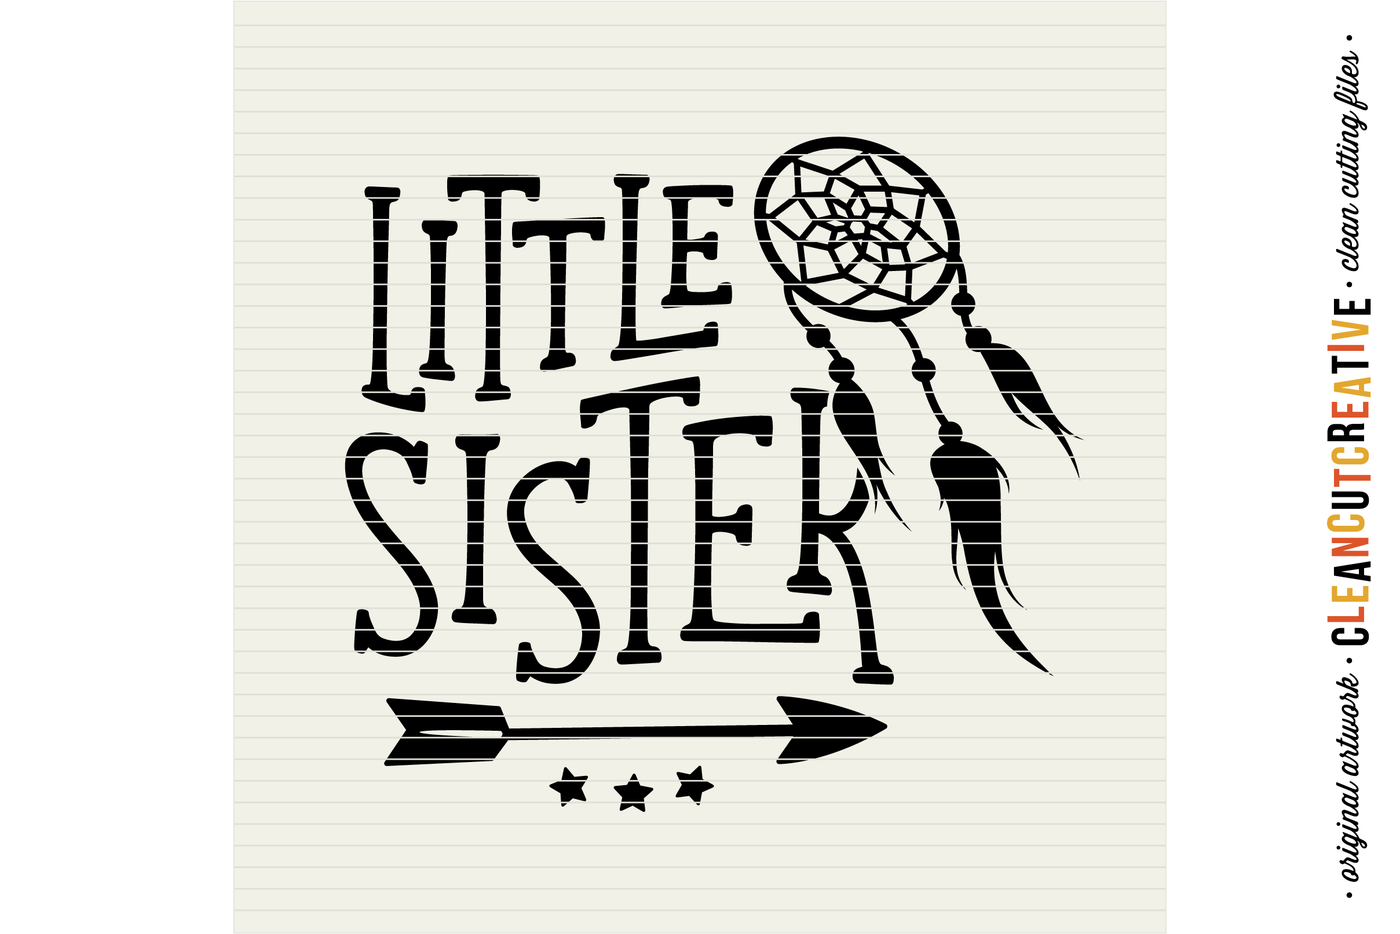 ori 34092 5a39730669de2322765b0a2af5081b3daee22e33 svg little sister cutfile design with dreamcatcher and arrow svg dxf eps png cricut and silhouette clean cutting files